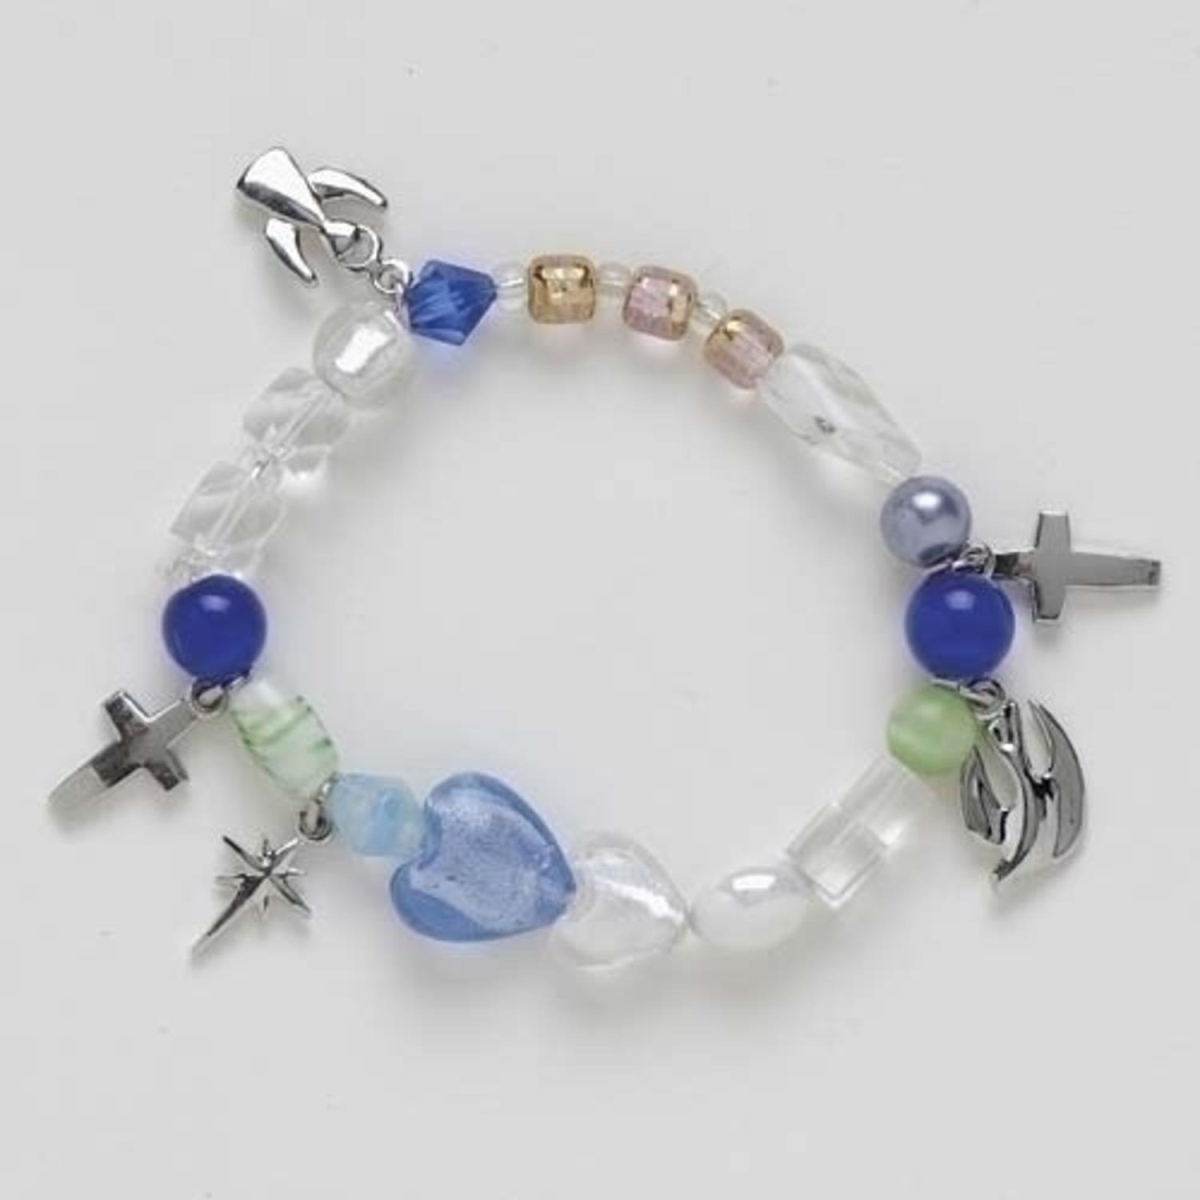 Picture of Roman 5987633 7.5 in. Silent Night Faith Story Religious Christmas Bracelet, Large